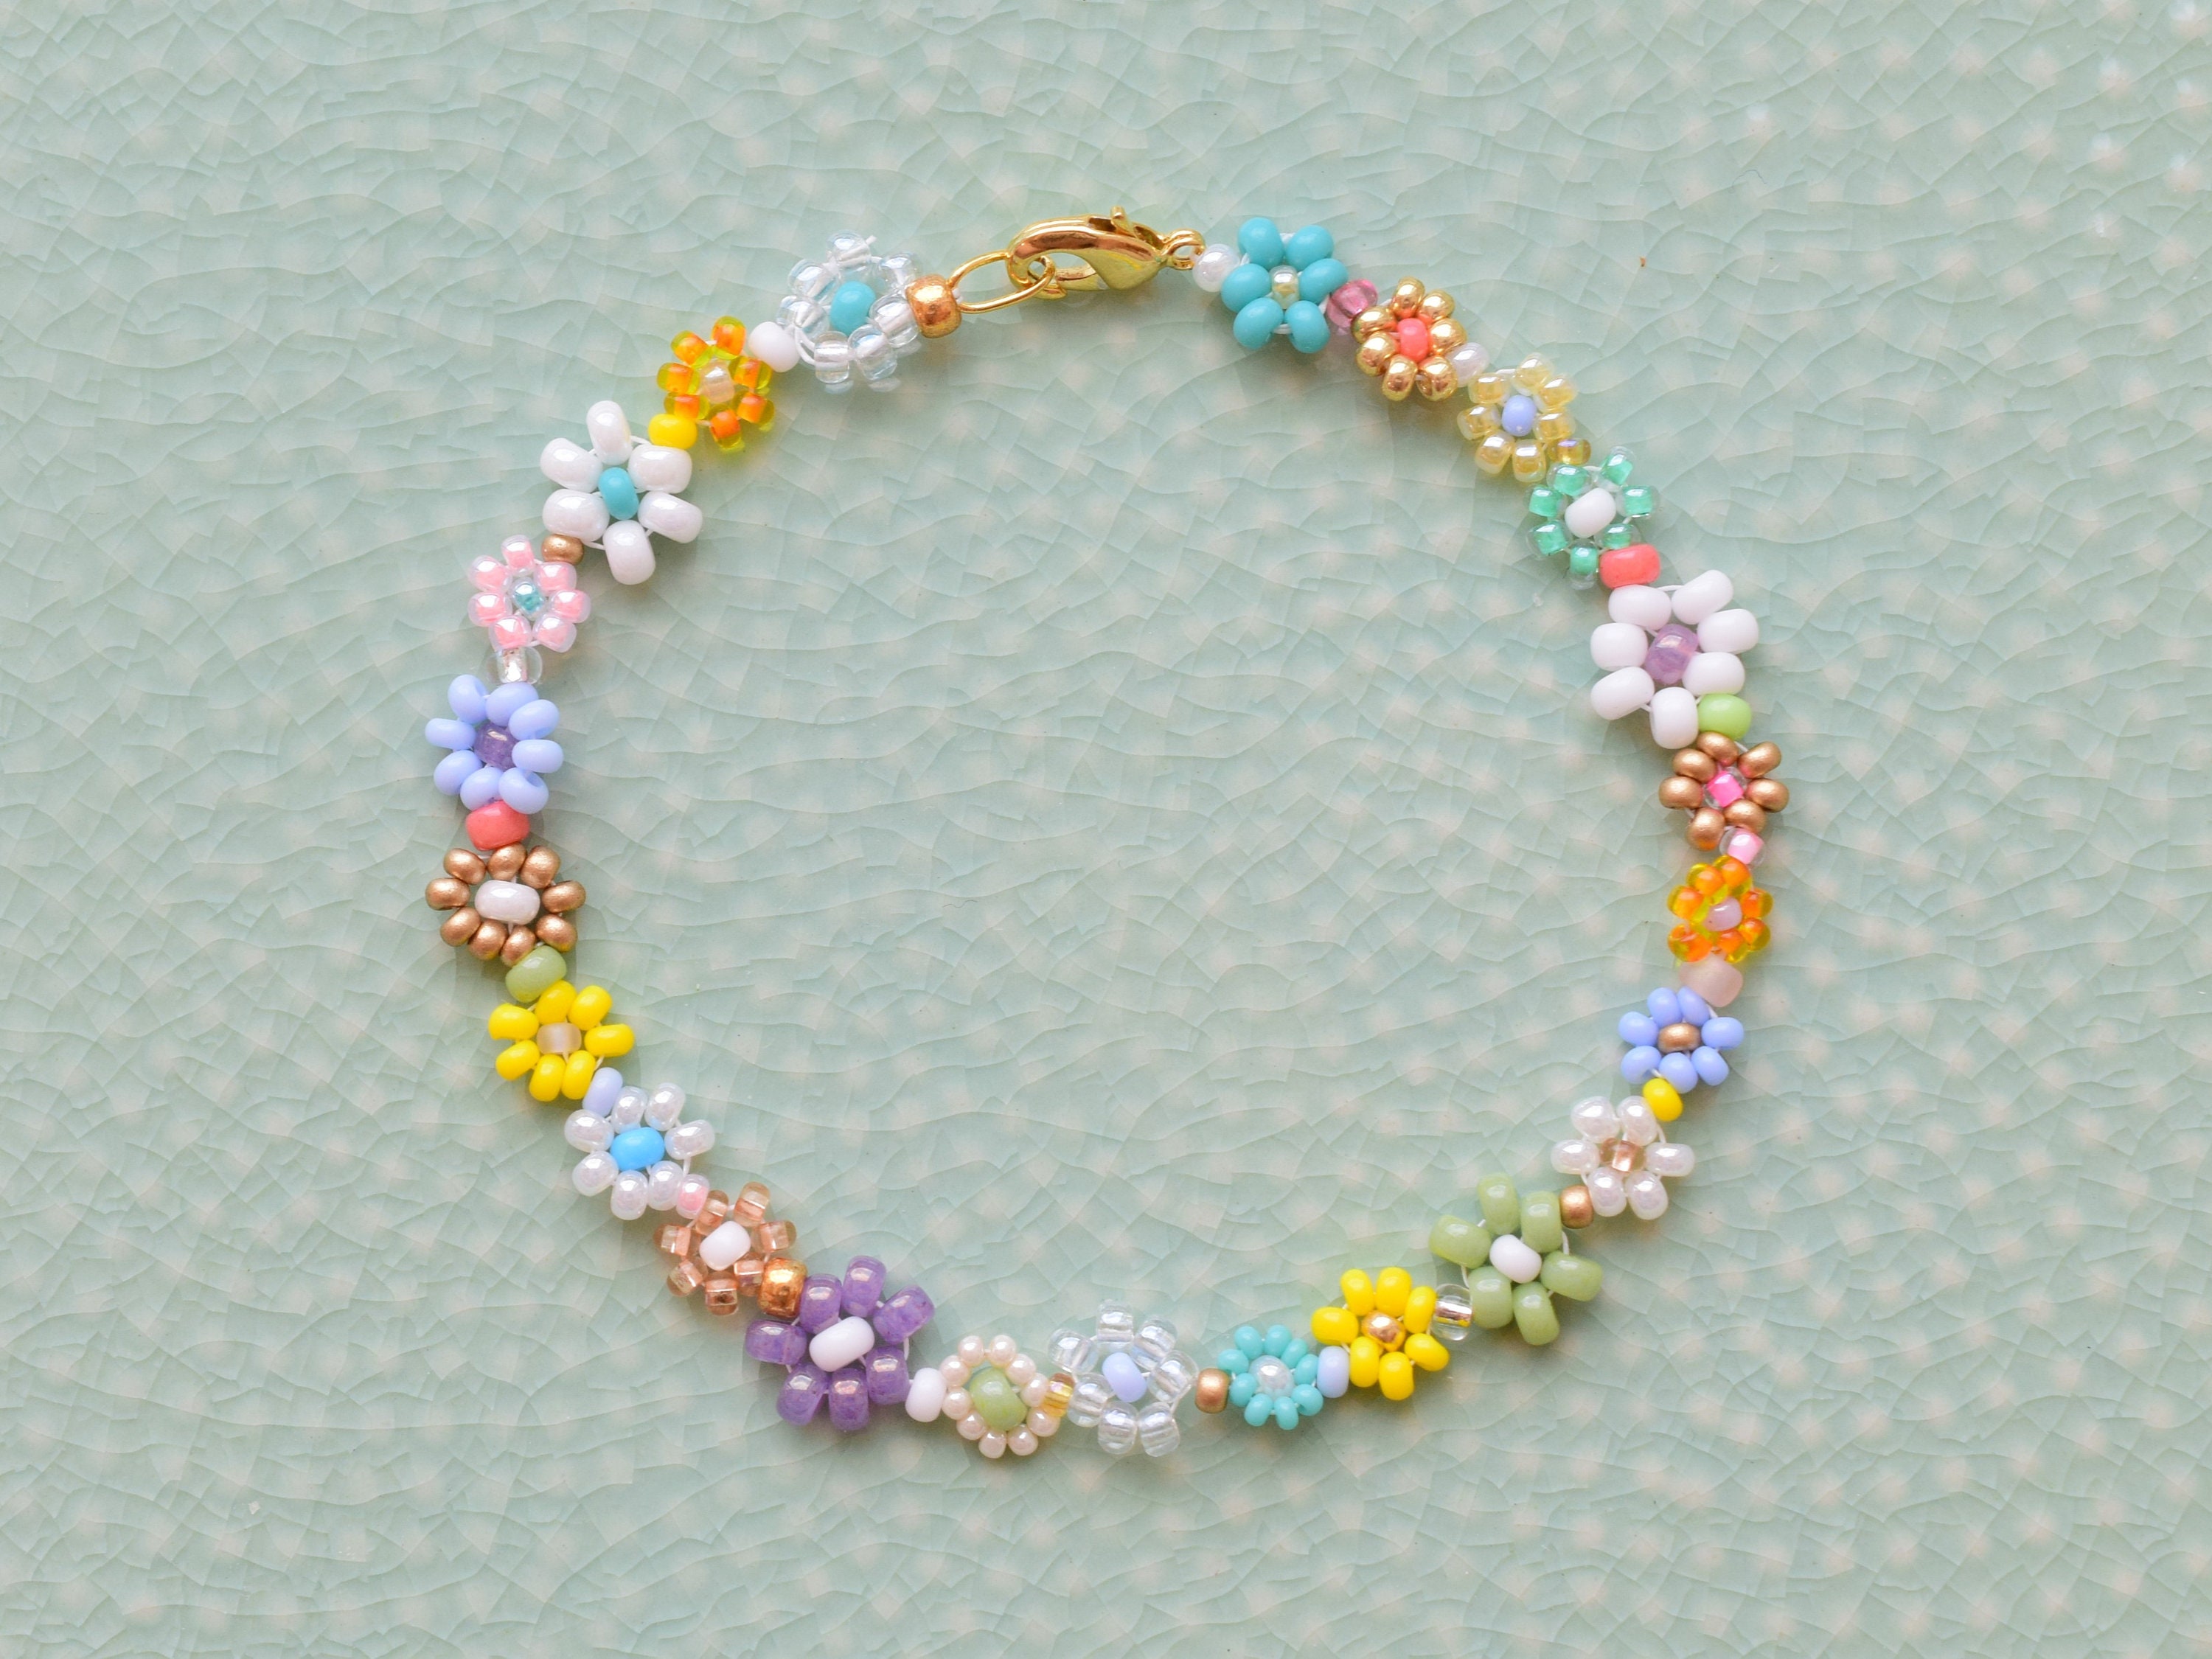 How to Make Seed Bead Daisy Flower Bracelets - MuffinChanel | Making  bracelets with beads, Friendship bracelets with beads, Flower bracelet diy